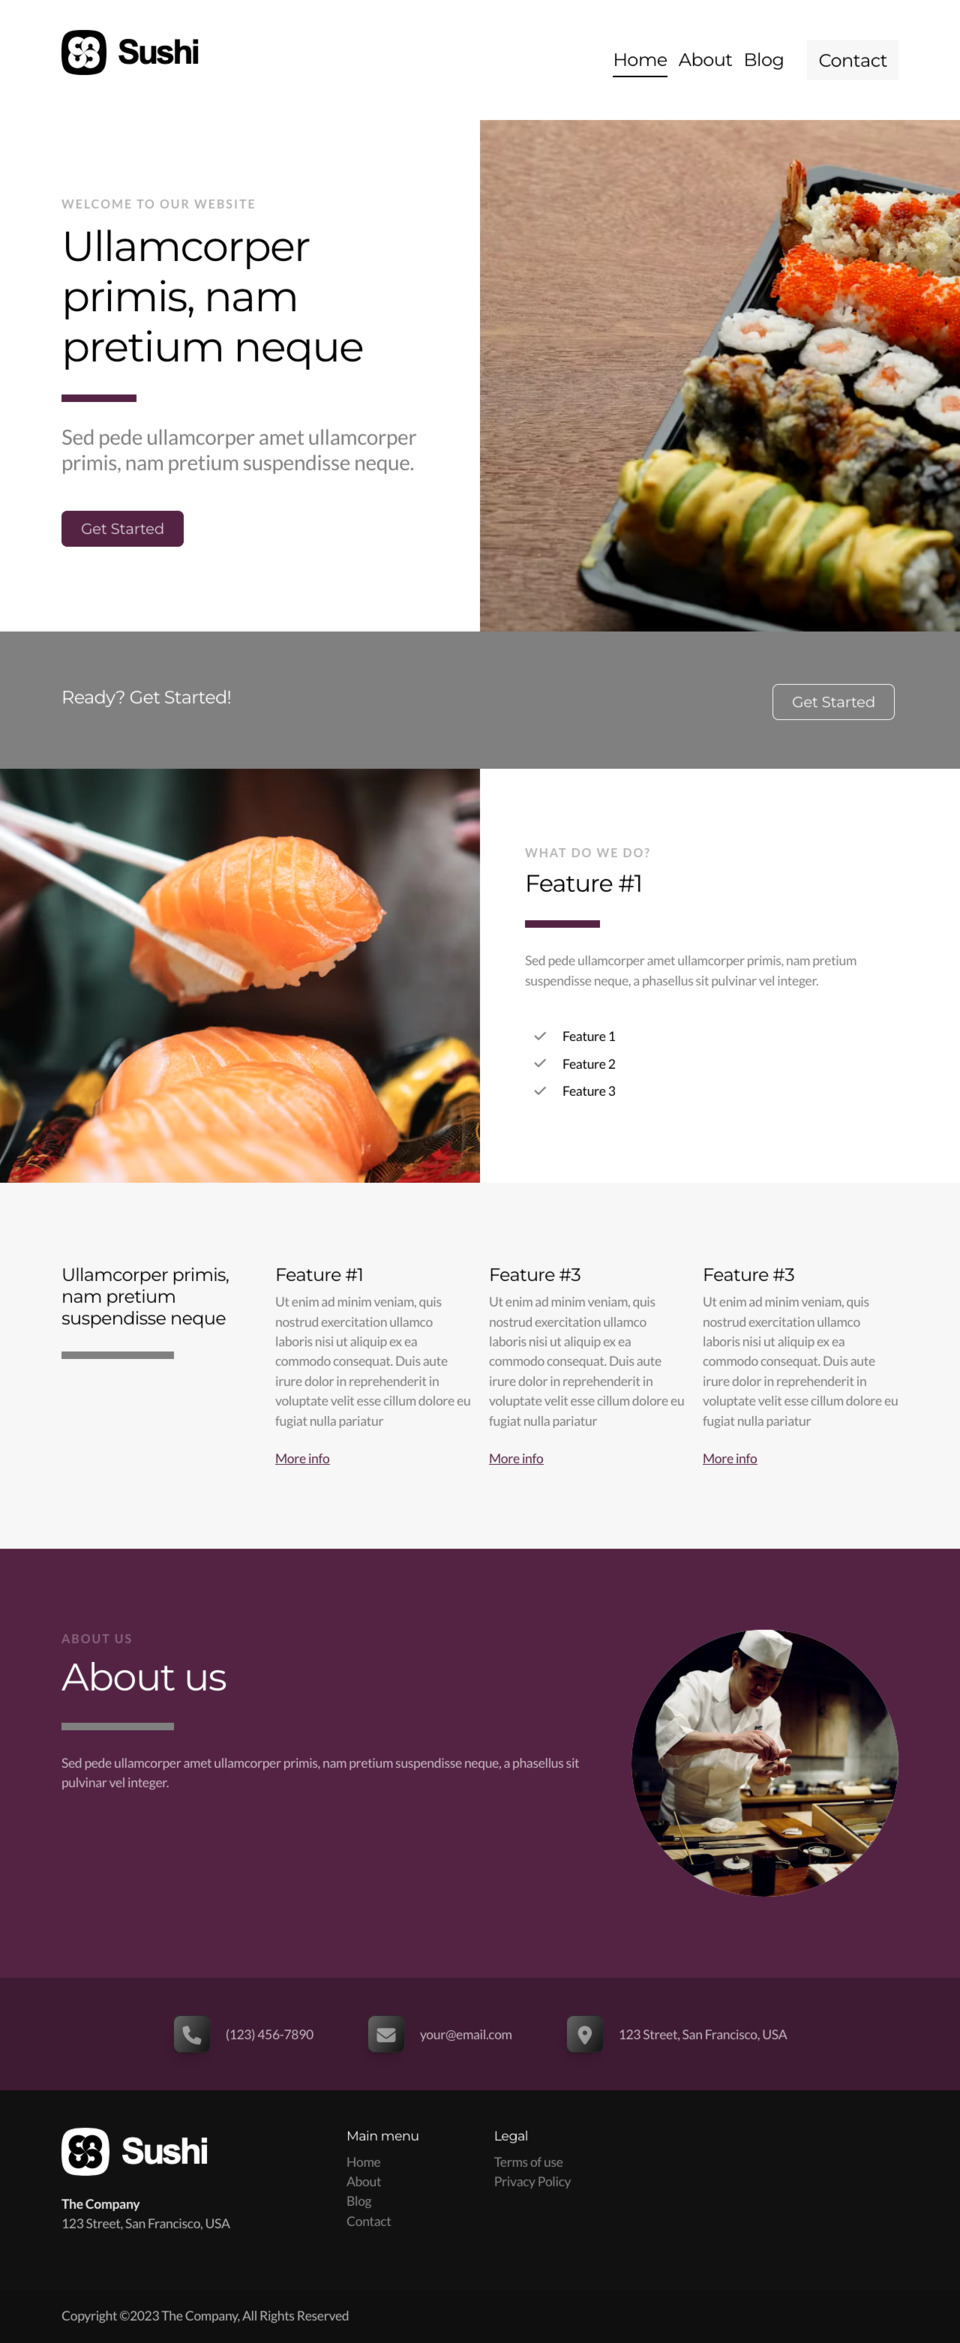 Sushi Website Template - Ideal for small business owners in the food industry, including sushi restaurants, Japanese cuisine eateries, seafood bars, and more.